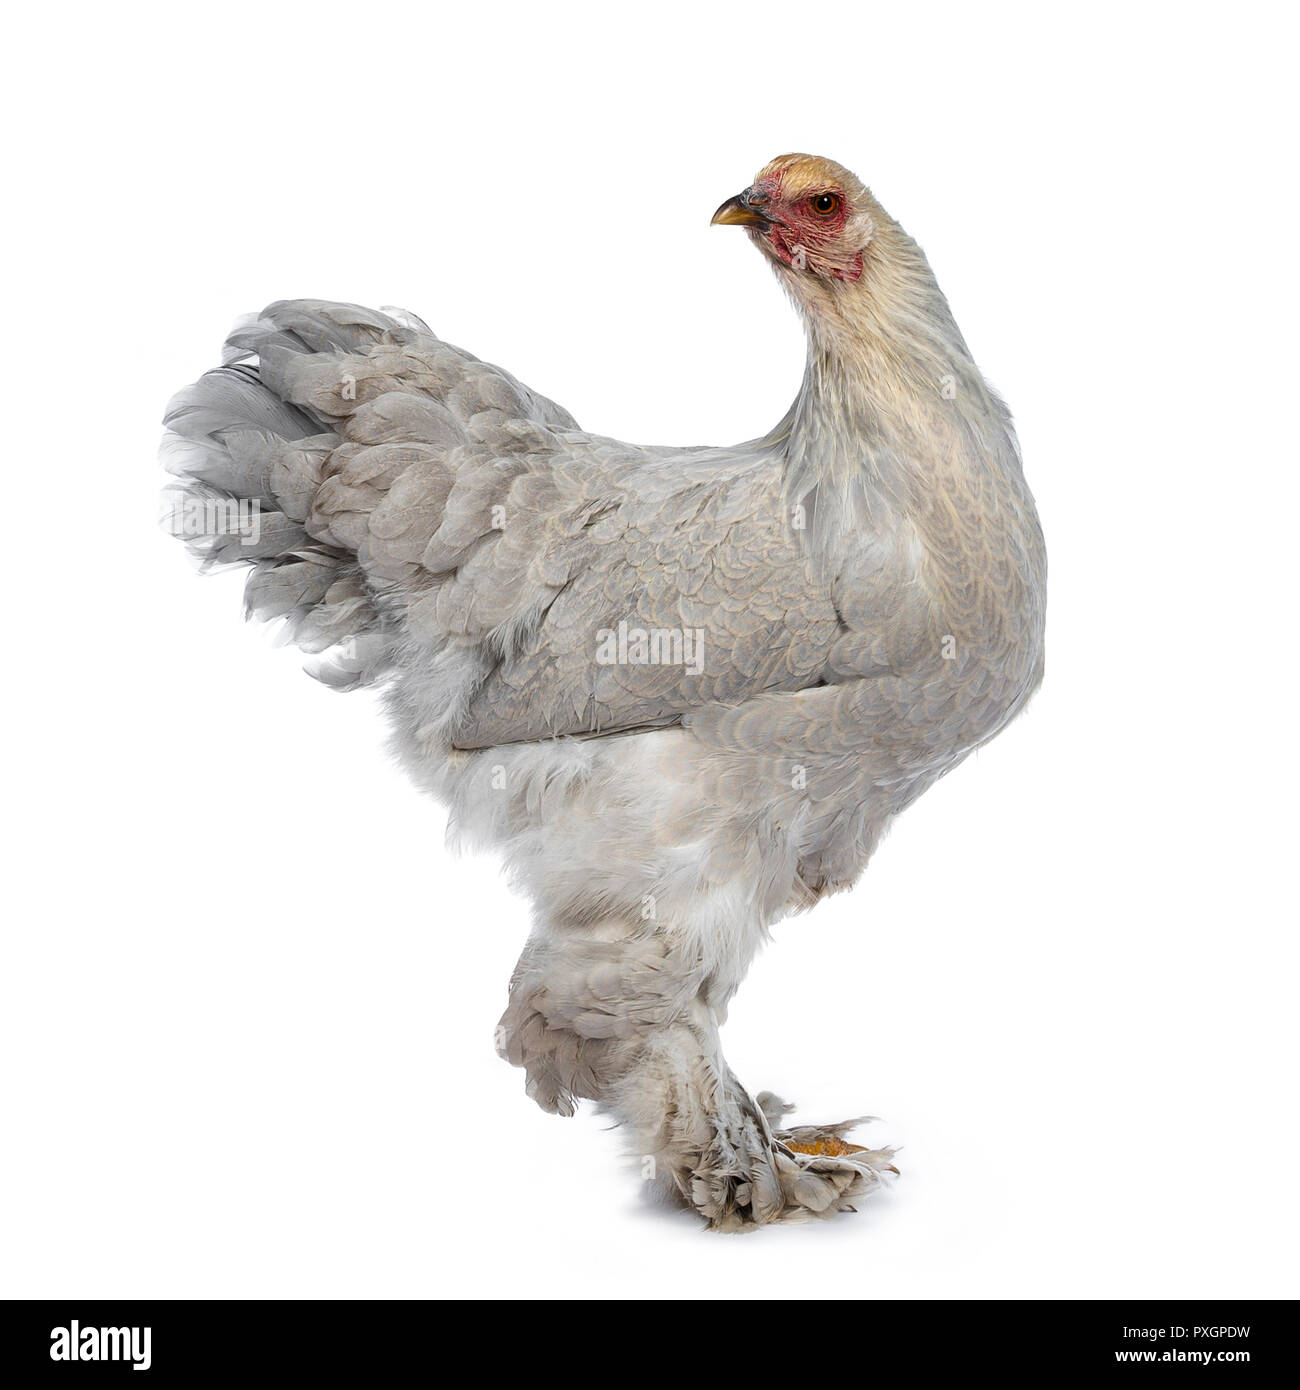 https://c8.alamy.com/comp/PXGPDW/blue-young-adult-brahma-chicken-standing-side-ways-looking-to-camera-isolated-on-white-background-PXGPDW.jpg